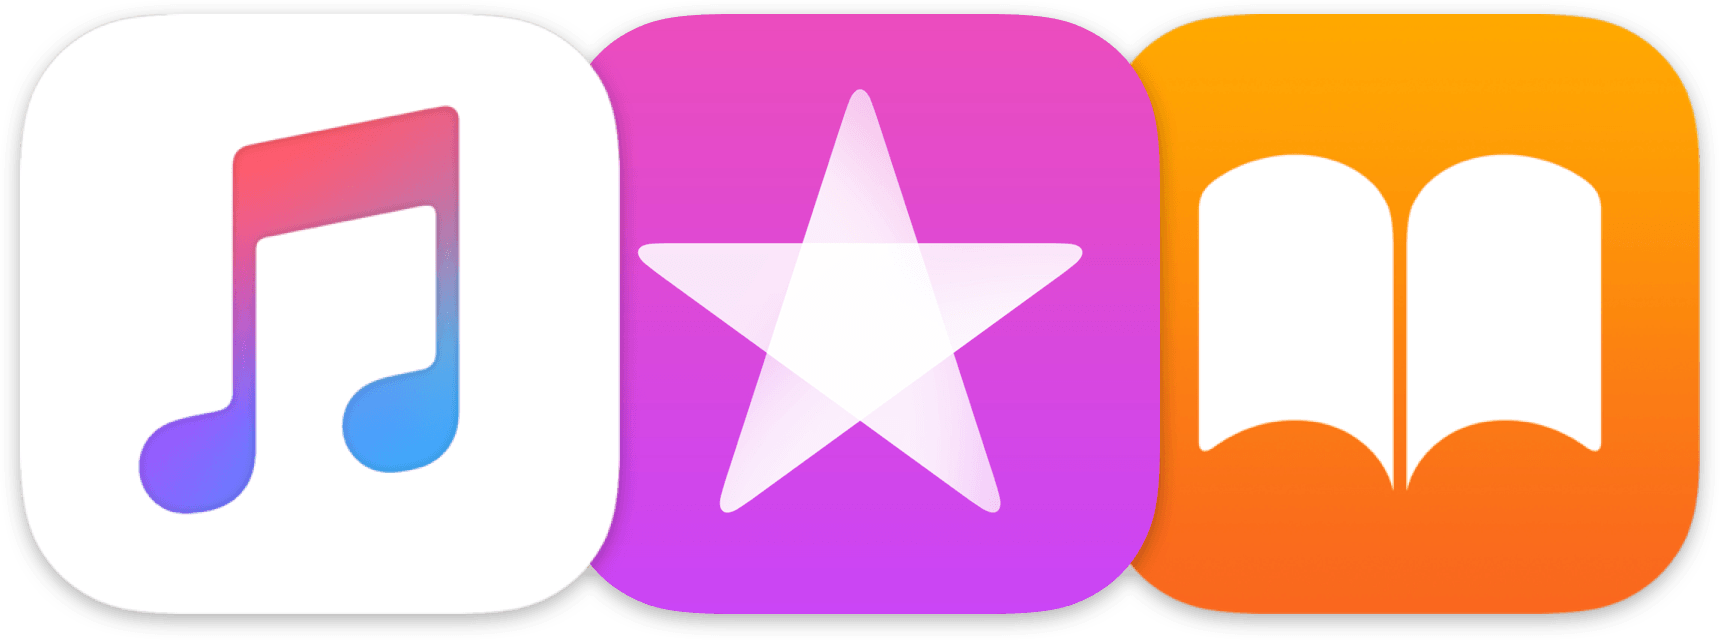 iTunes Store Logo - iTunes and Apple Books Store Badges